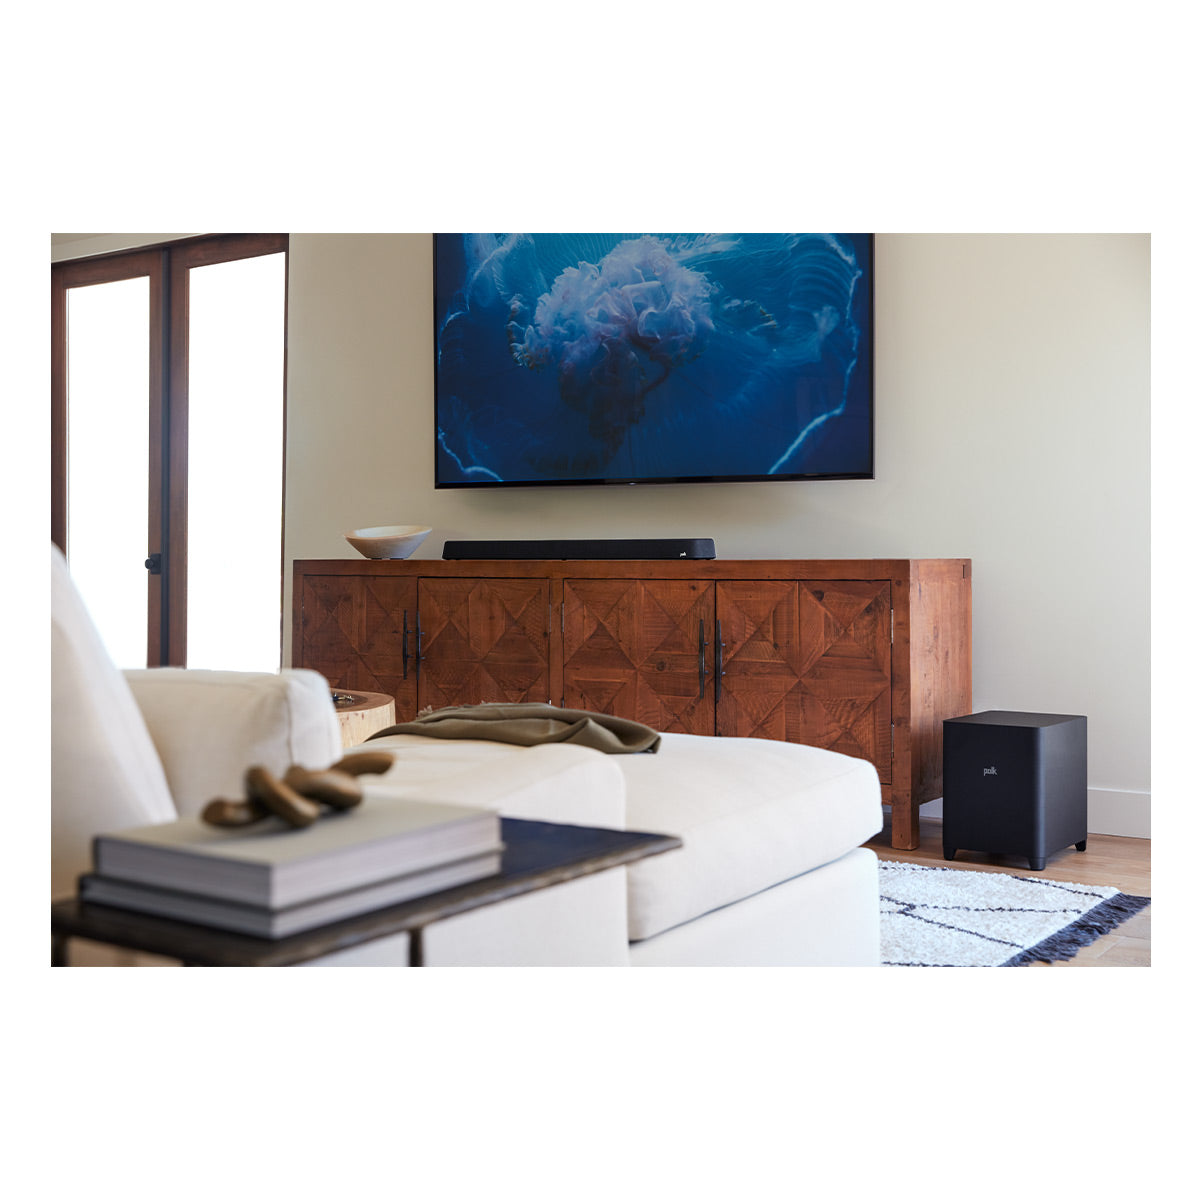 Polk Audio MagniFi Max AX 6.1 Channel Soundbar System with Dolby Atmos/DTS:X and 10&rdquo; Wireless Subwoofer